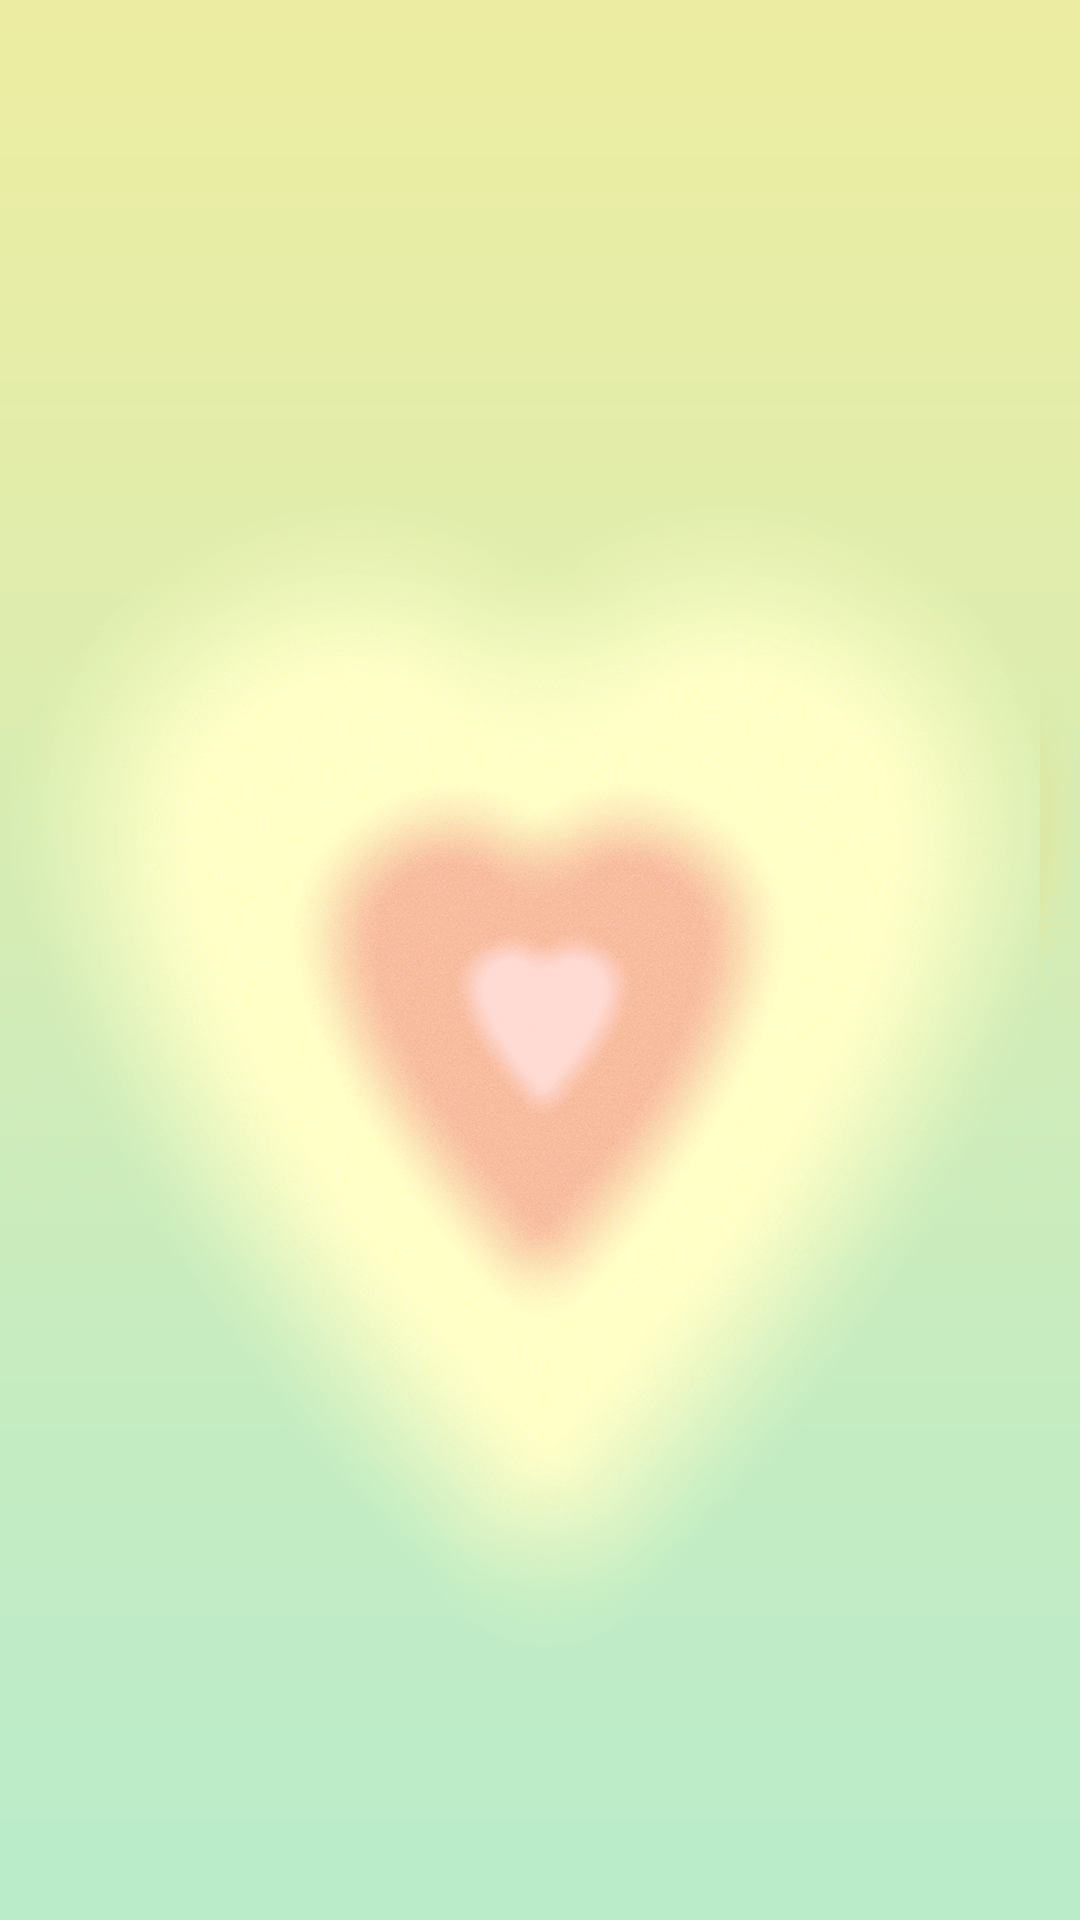 A heart shape in the middle of a blurred image - Sage green